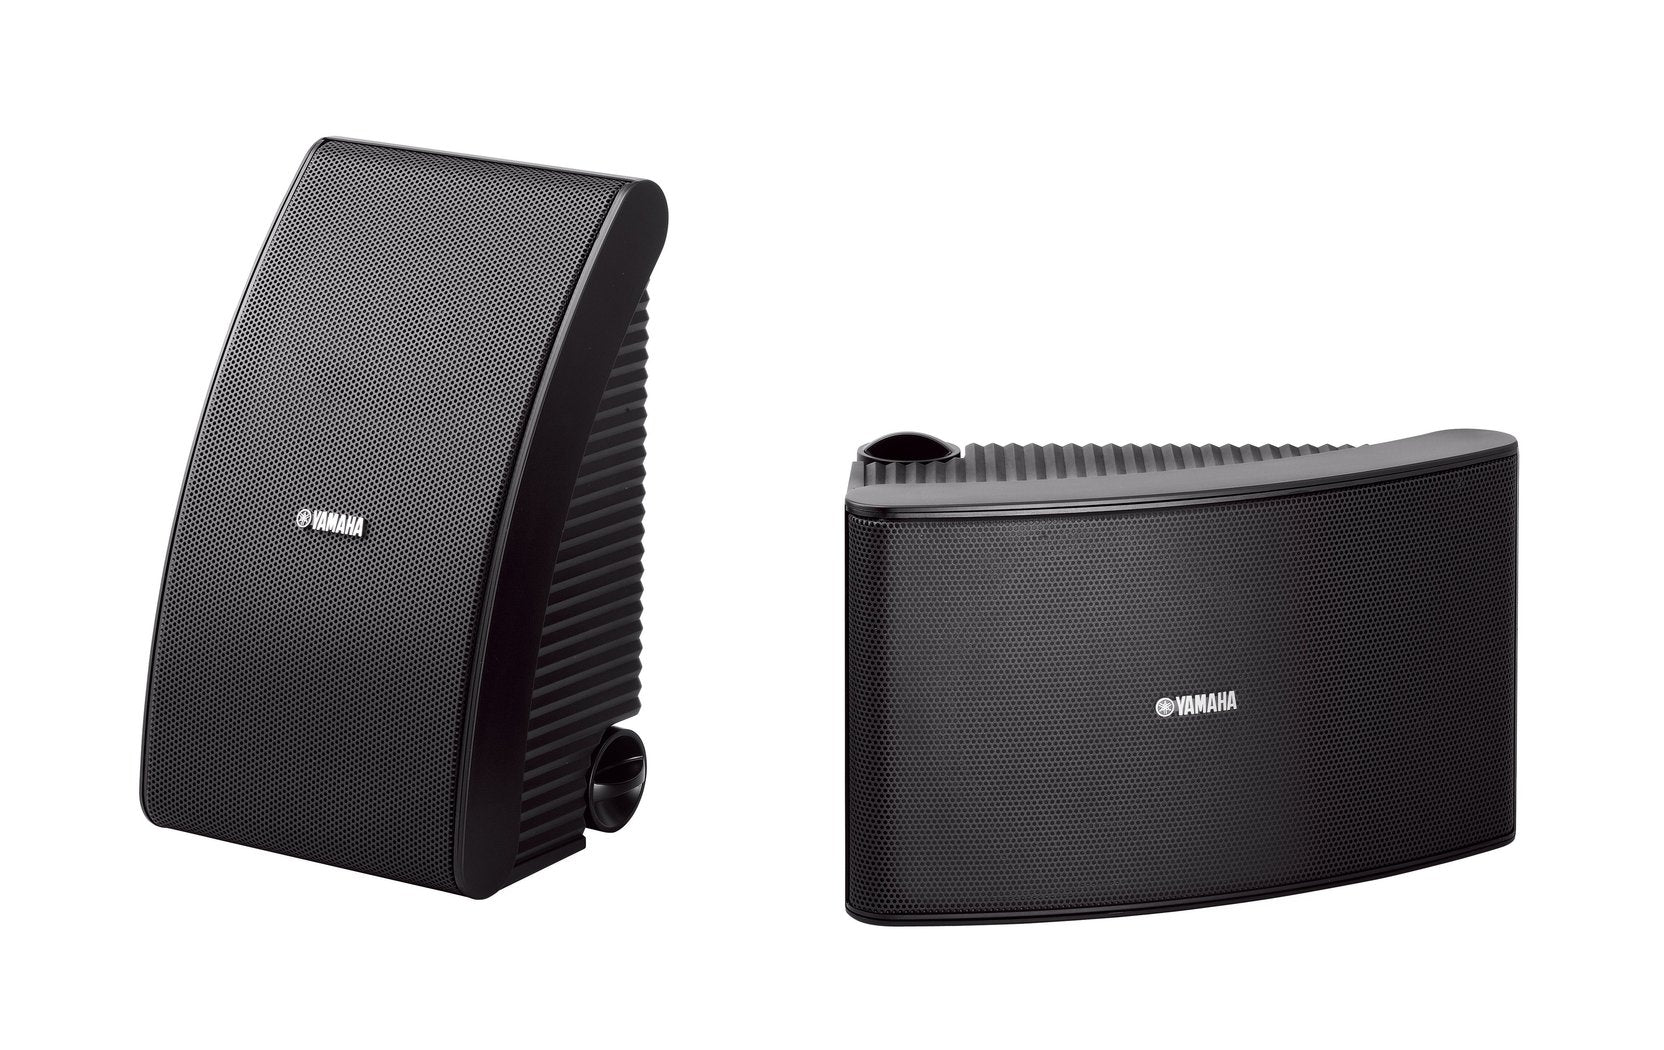 Yamaha NS-AW592 pair of outdoor speakers